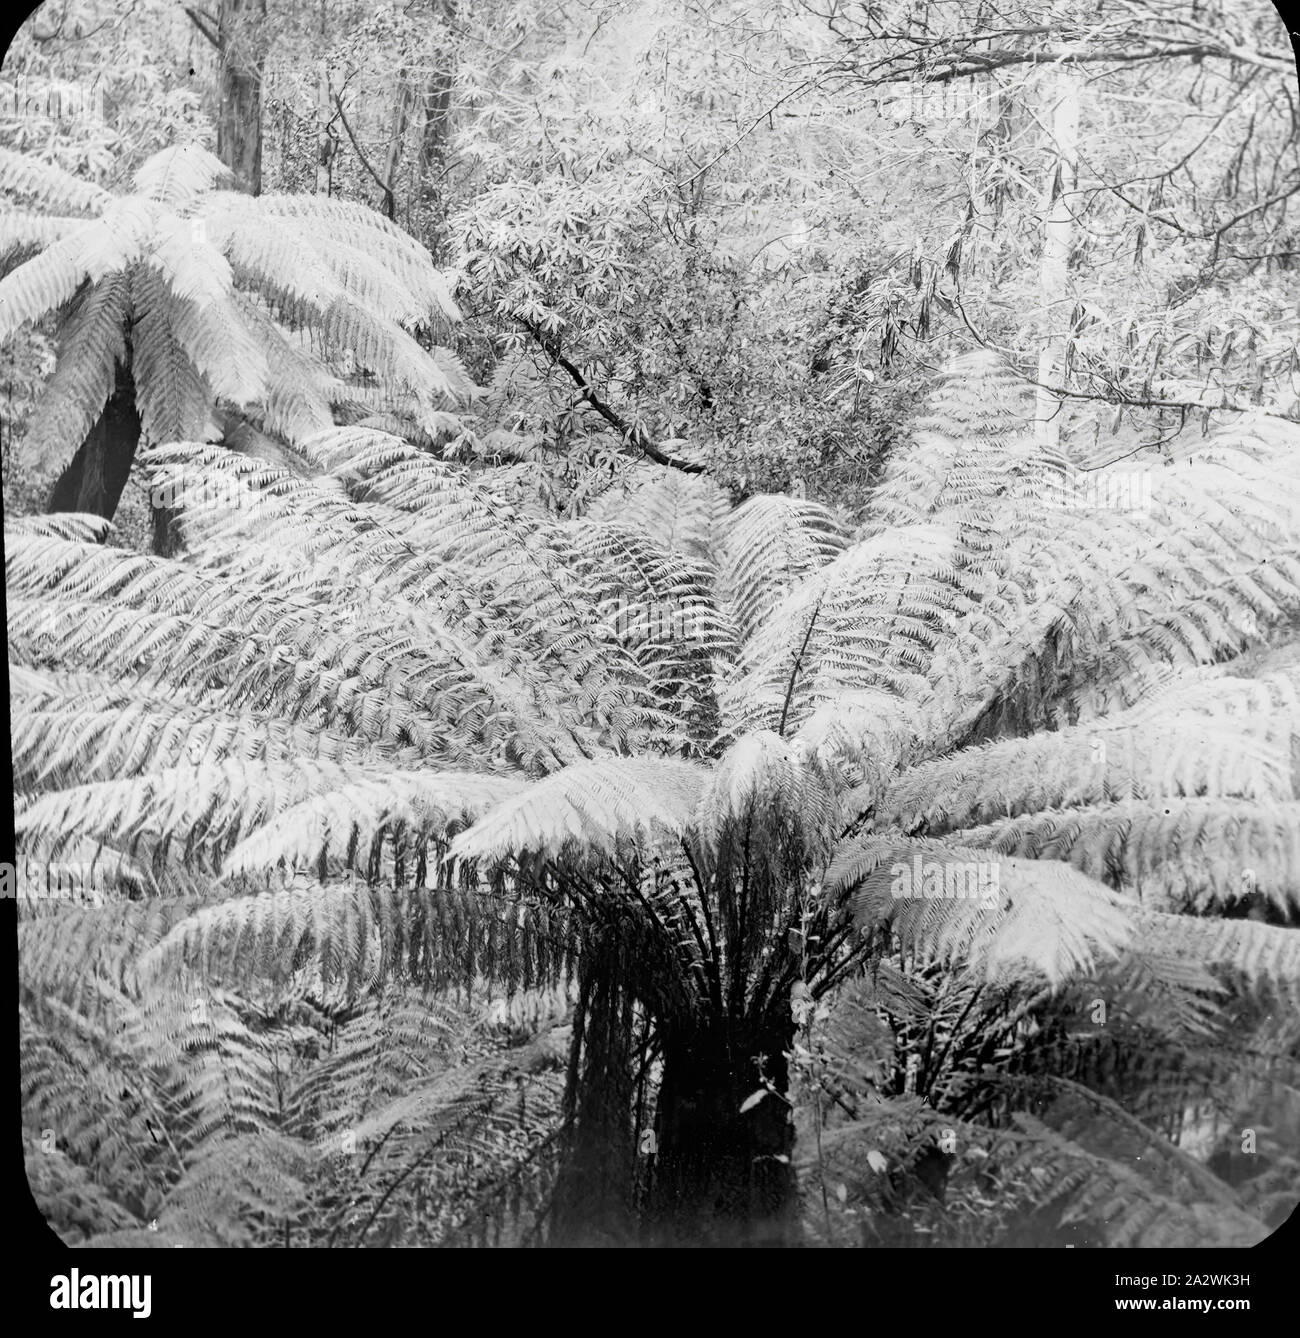 Lantern Slide - Tree Ferns, Dandenongs, Victoria, Date Unknown, Black and white image of tree ferns in the Dandenongs of Victoria Stock Photo